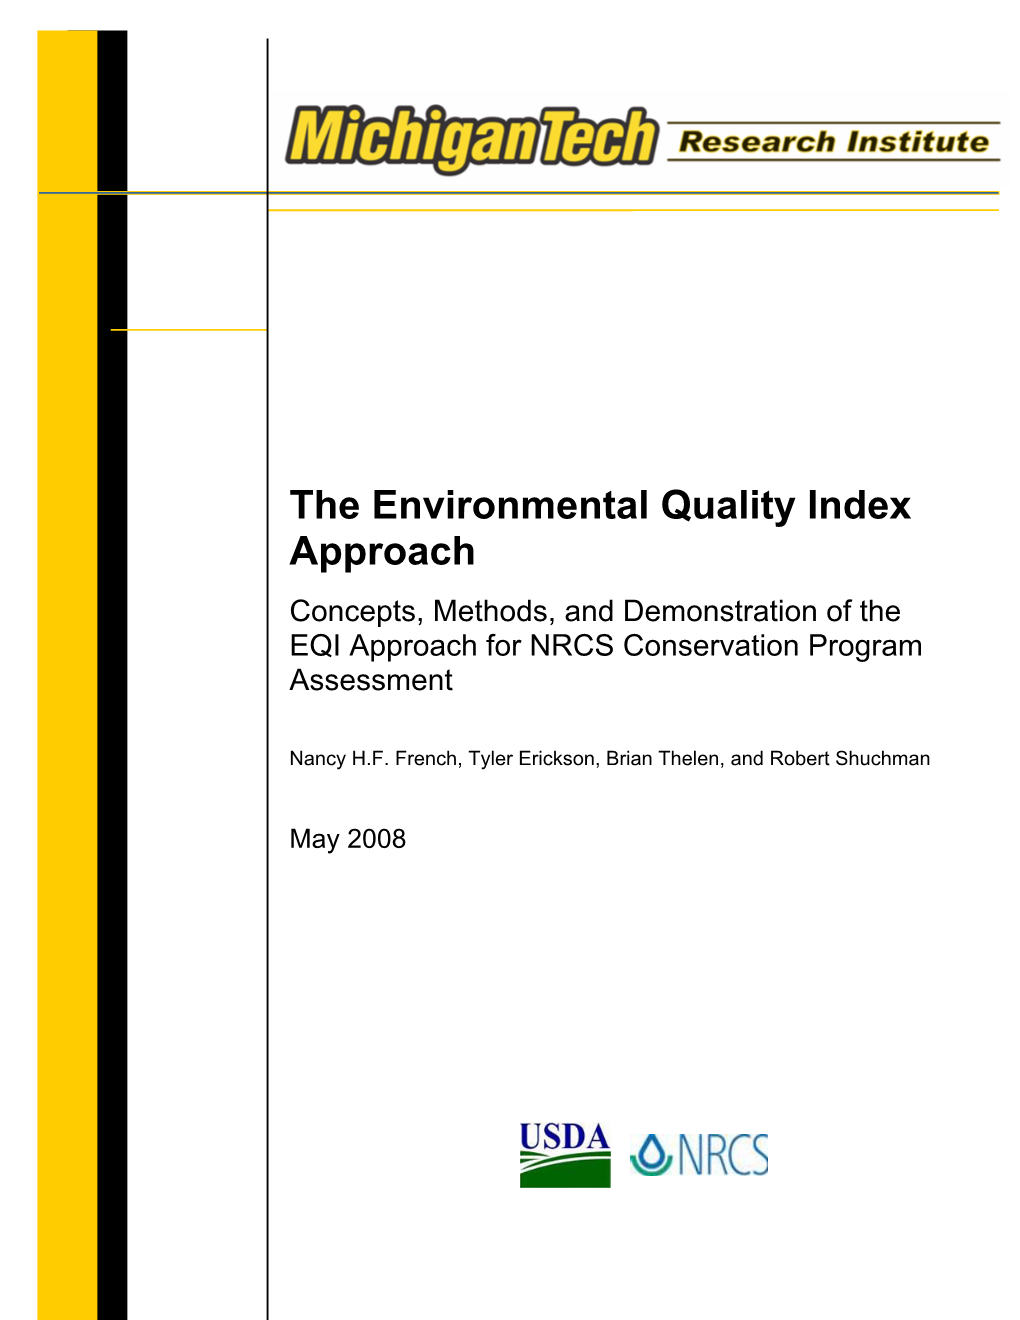 The Environmental Quality Index Approach: Concepts, Methods, and Demonstration of the EQI Approach for NRCS Conservation